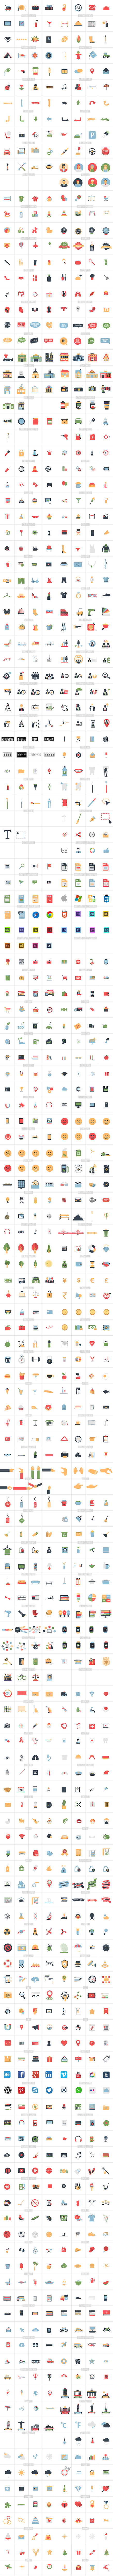  Flat Animated Icons Library 